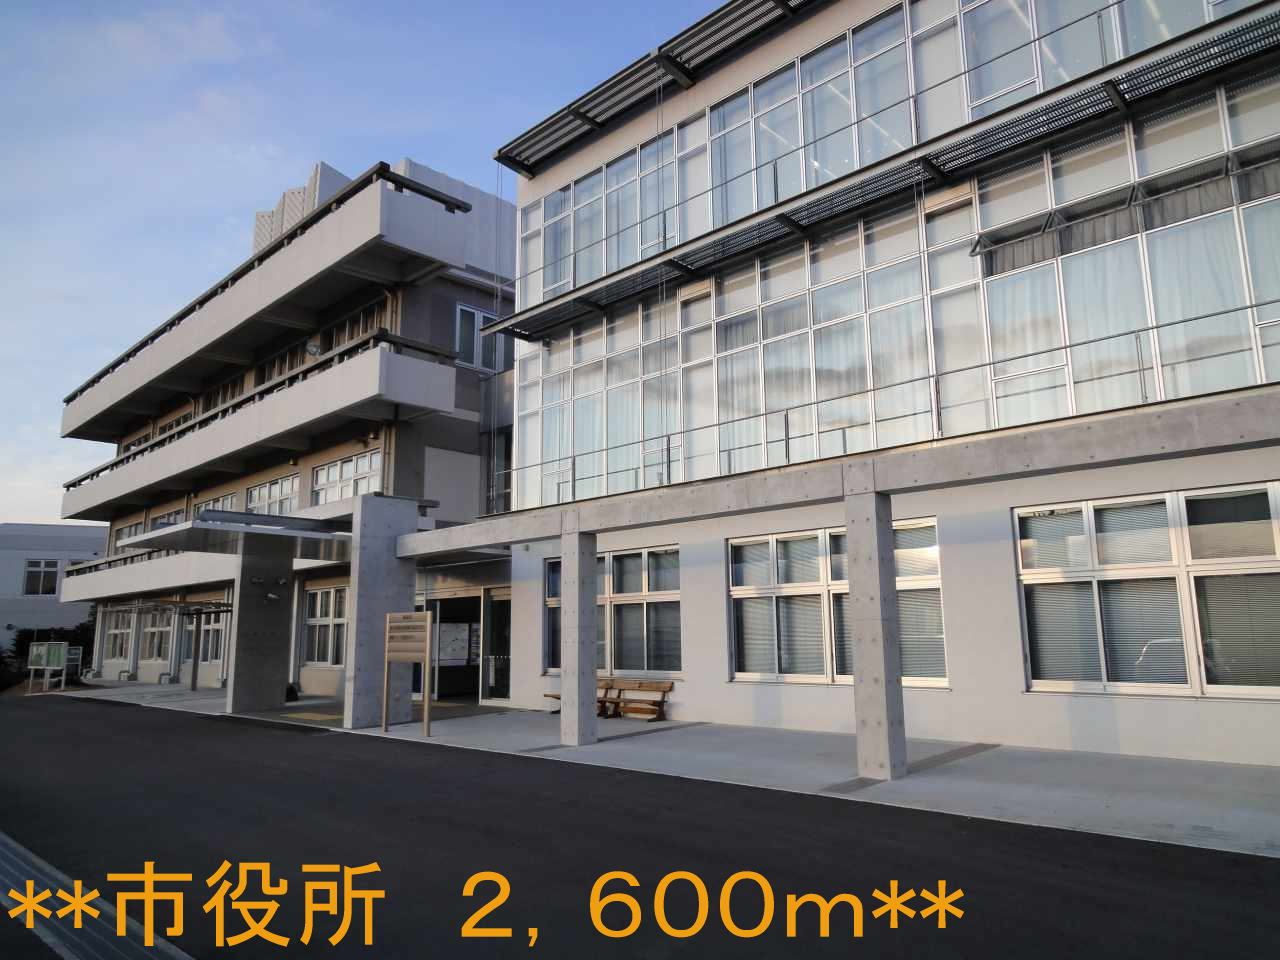 Government office. Tomi City city hall until the (government office) 2600m